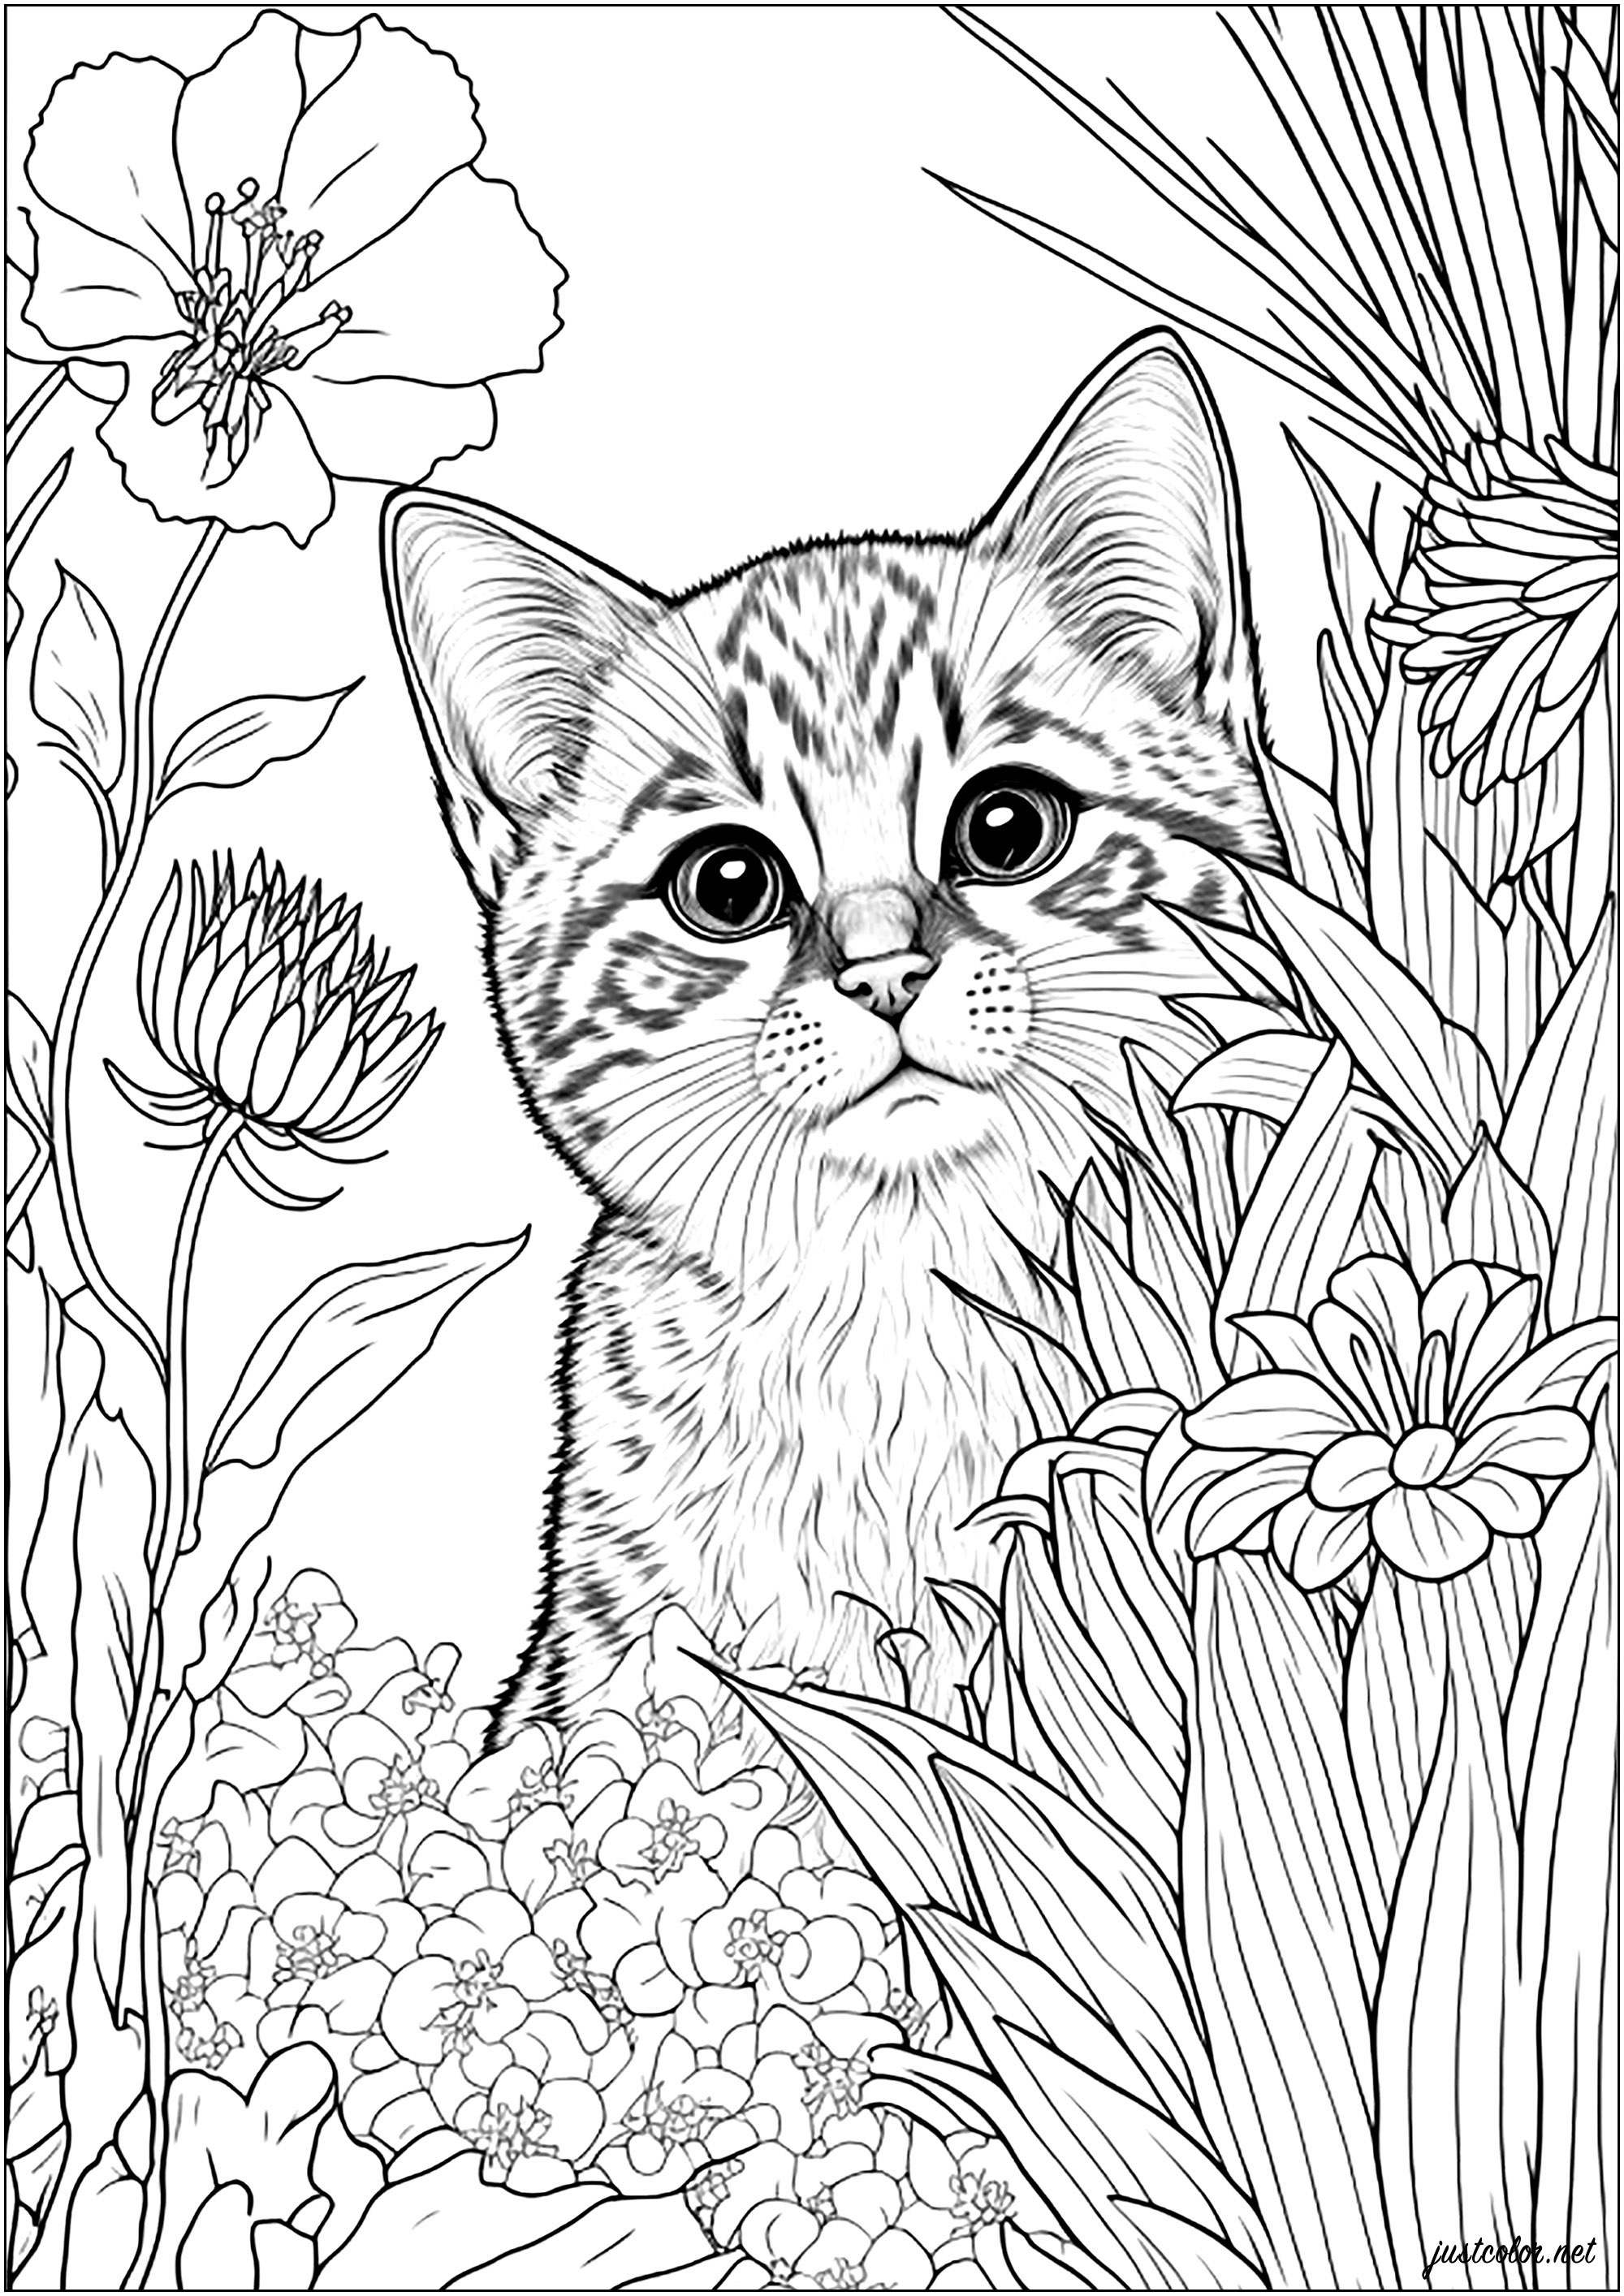 Young cat surrounded by flowers - Cats Adult Coloring Pages